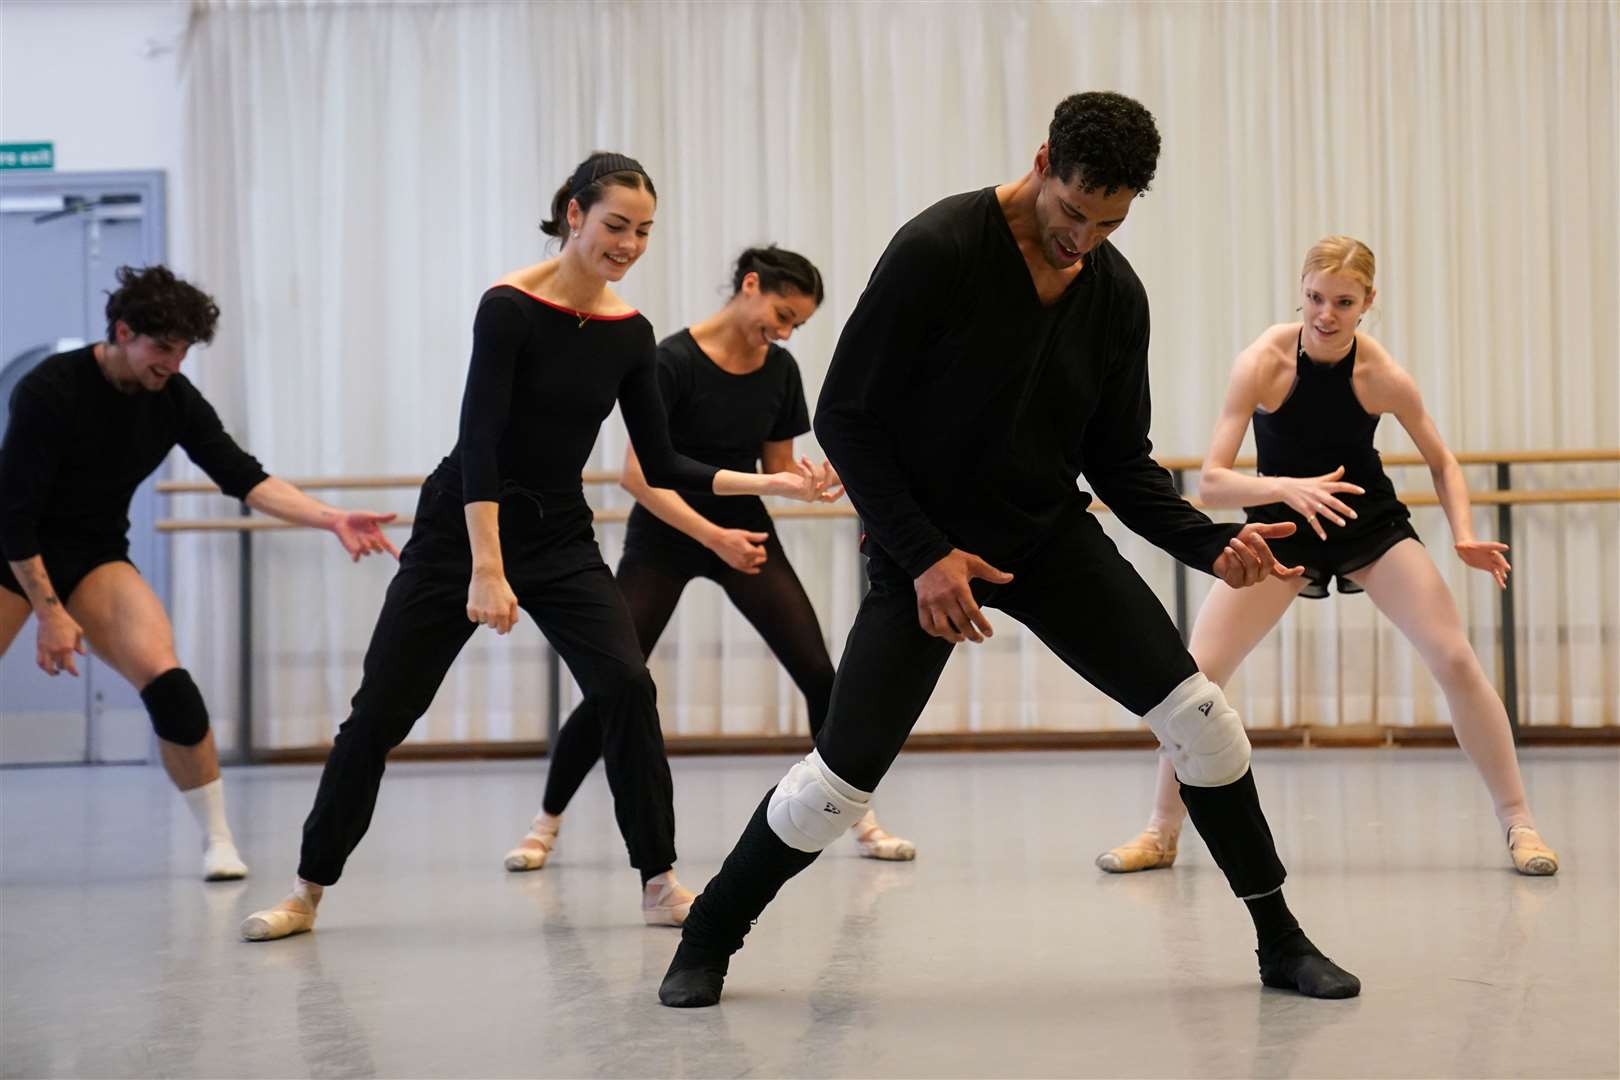 The cast in rehearsal (Jacob King/PA)